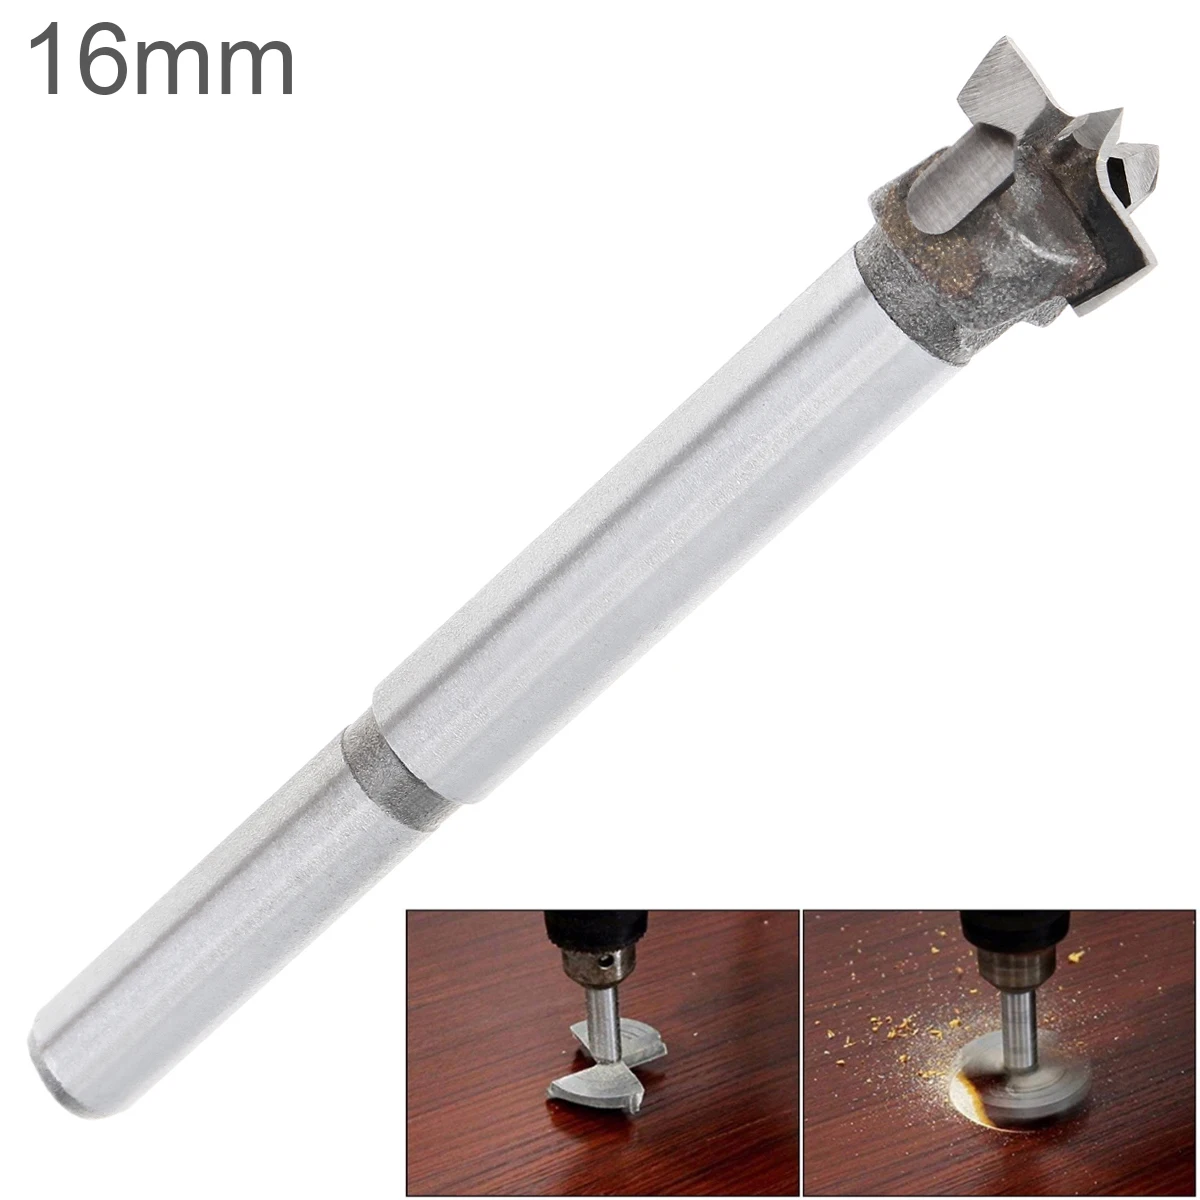 16mm Tungsten Steel Hard Alloy Wood Drill Bits Woodworking Hole Opener for Drilling on Plasterboard /Plastic Board /Wooden Board 1pc 30mm wood drill bits hinge boring hole saw drill woodworking hole opener for wood plastic plywood